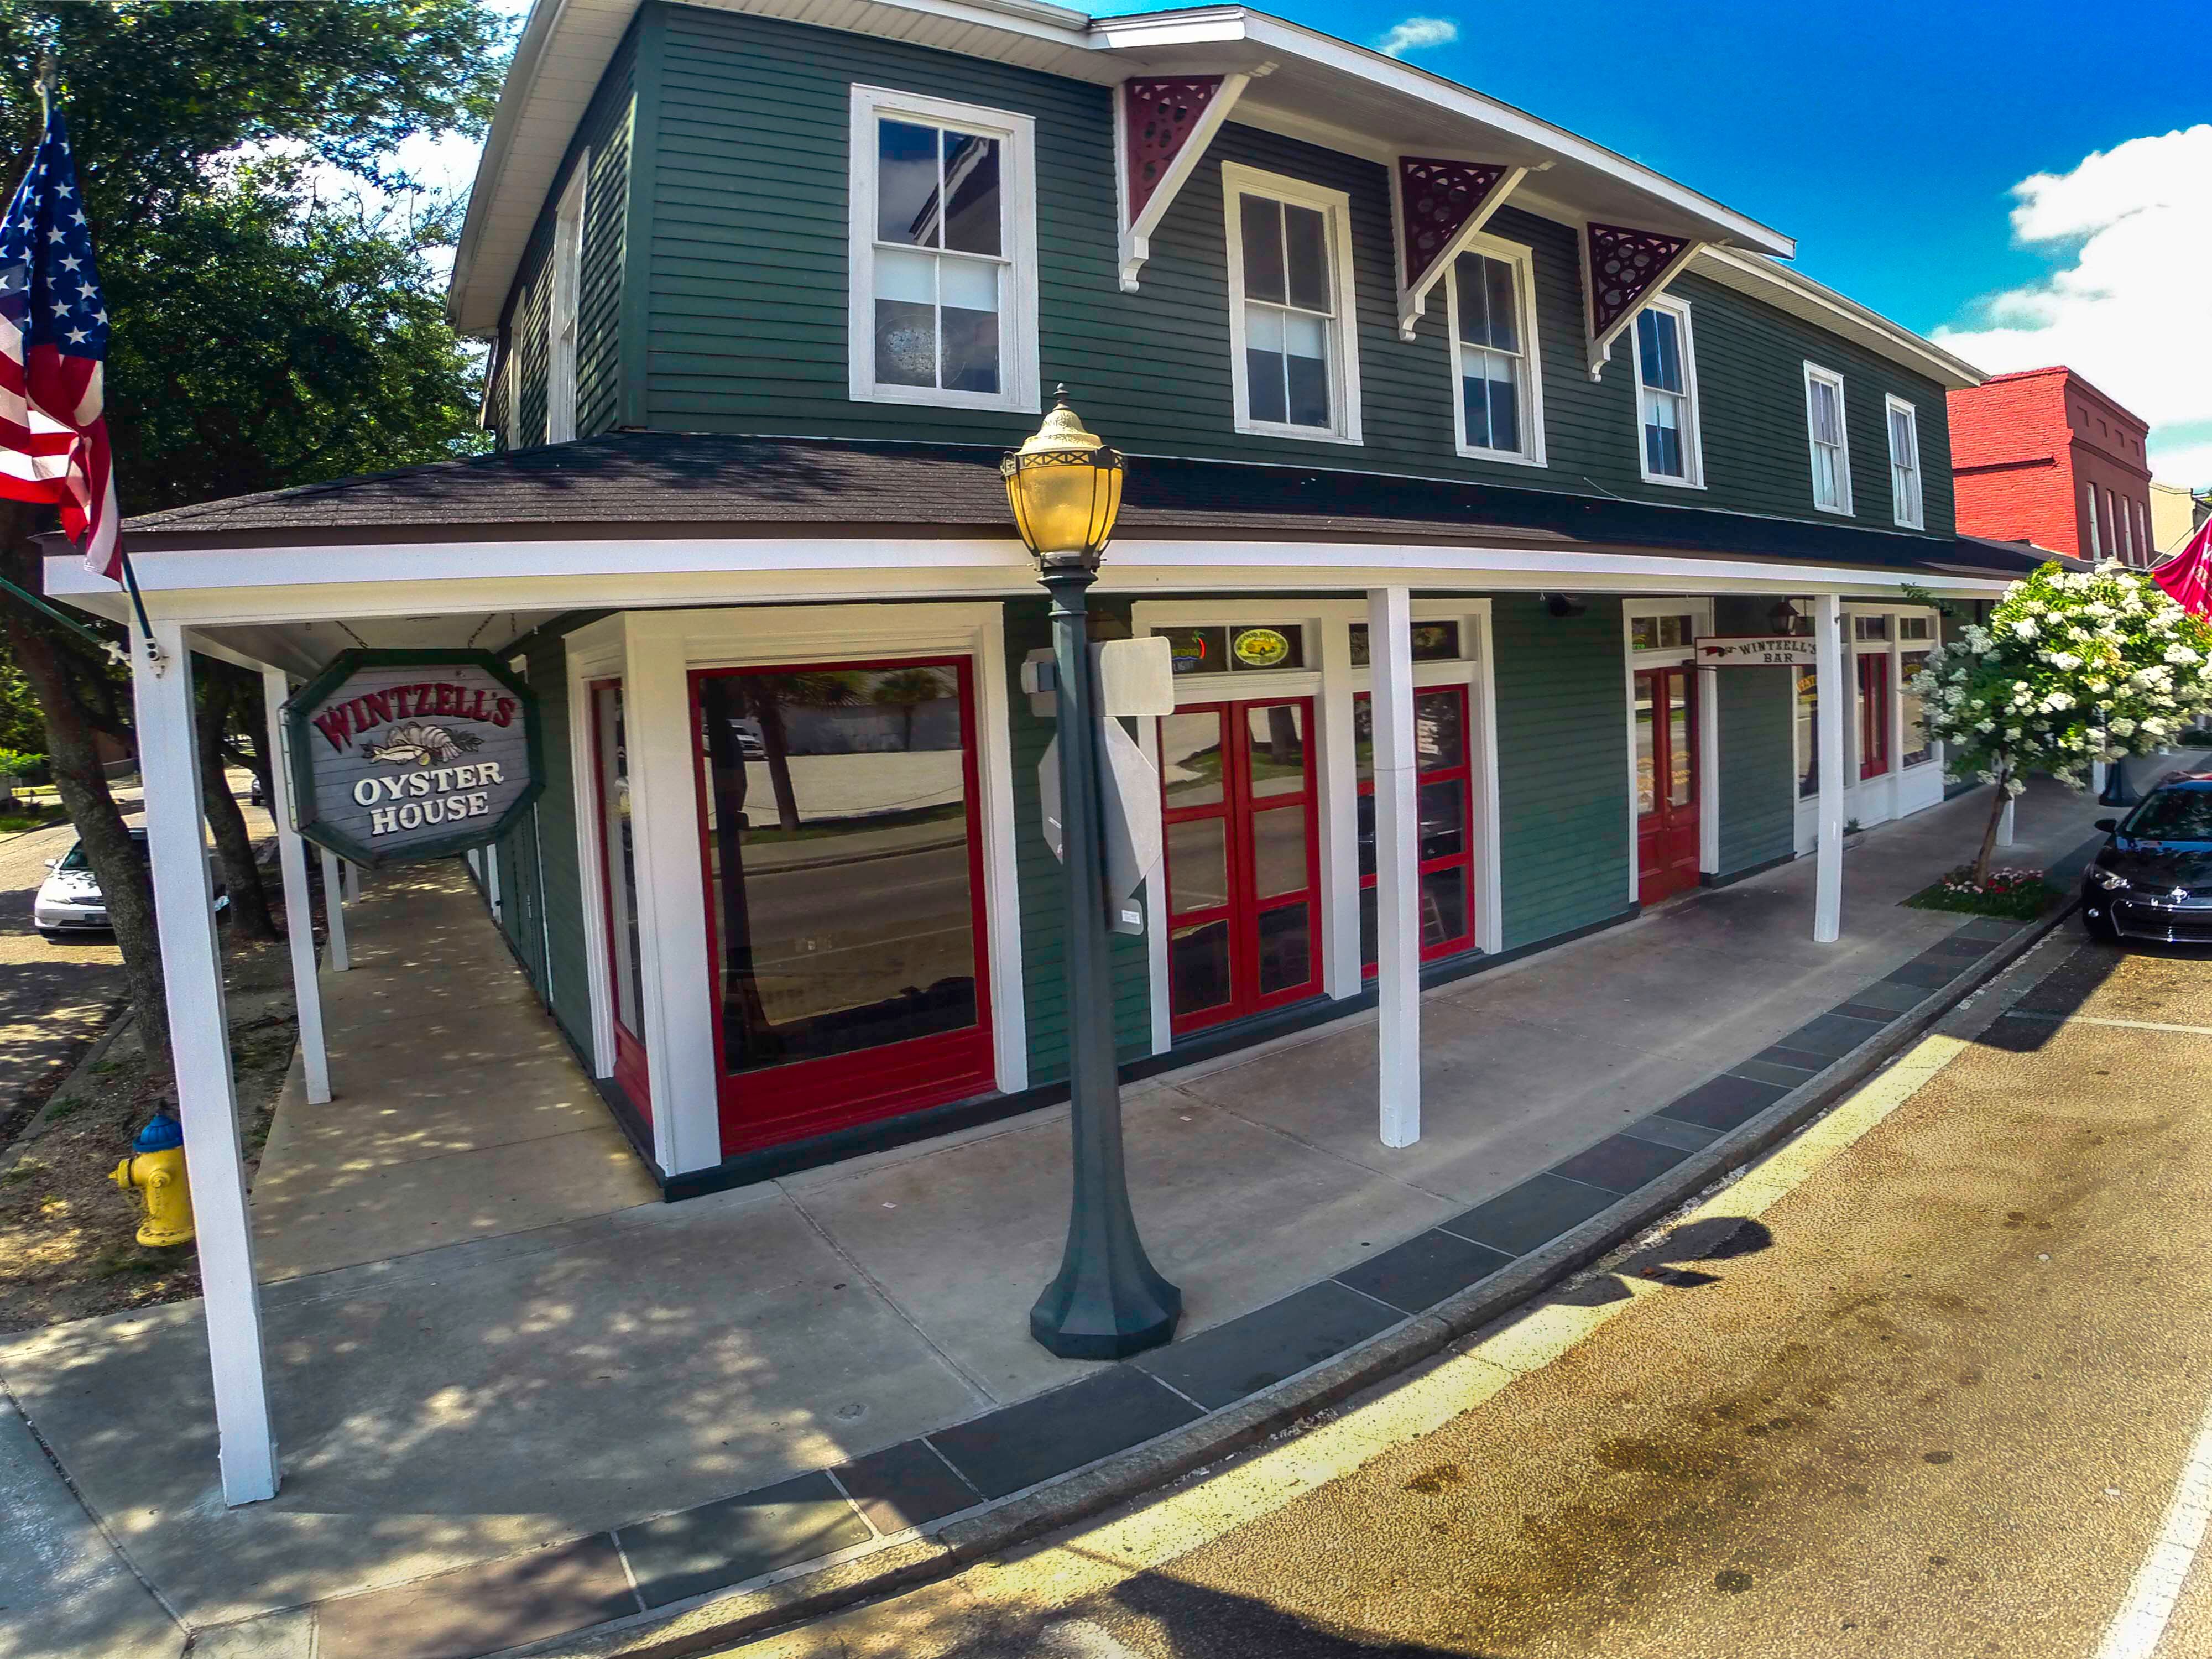 Picture of Wintzell's Oyster House